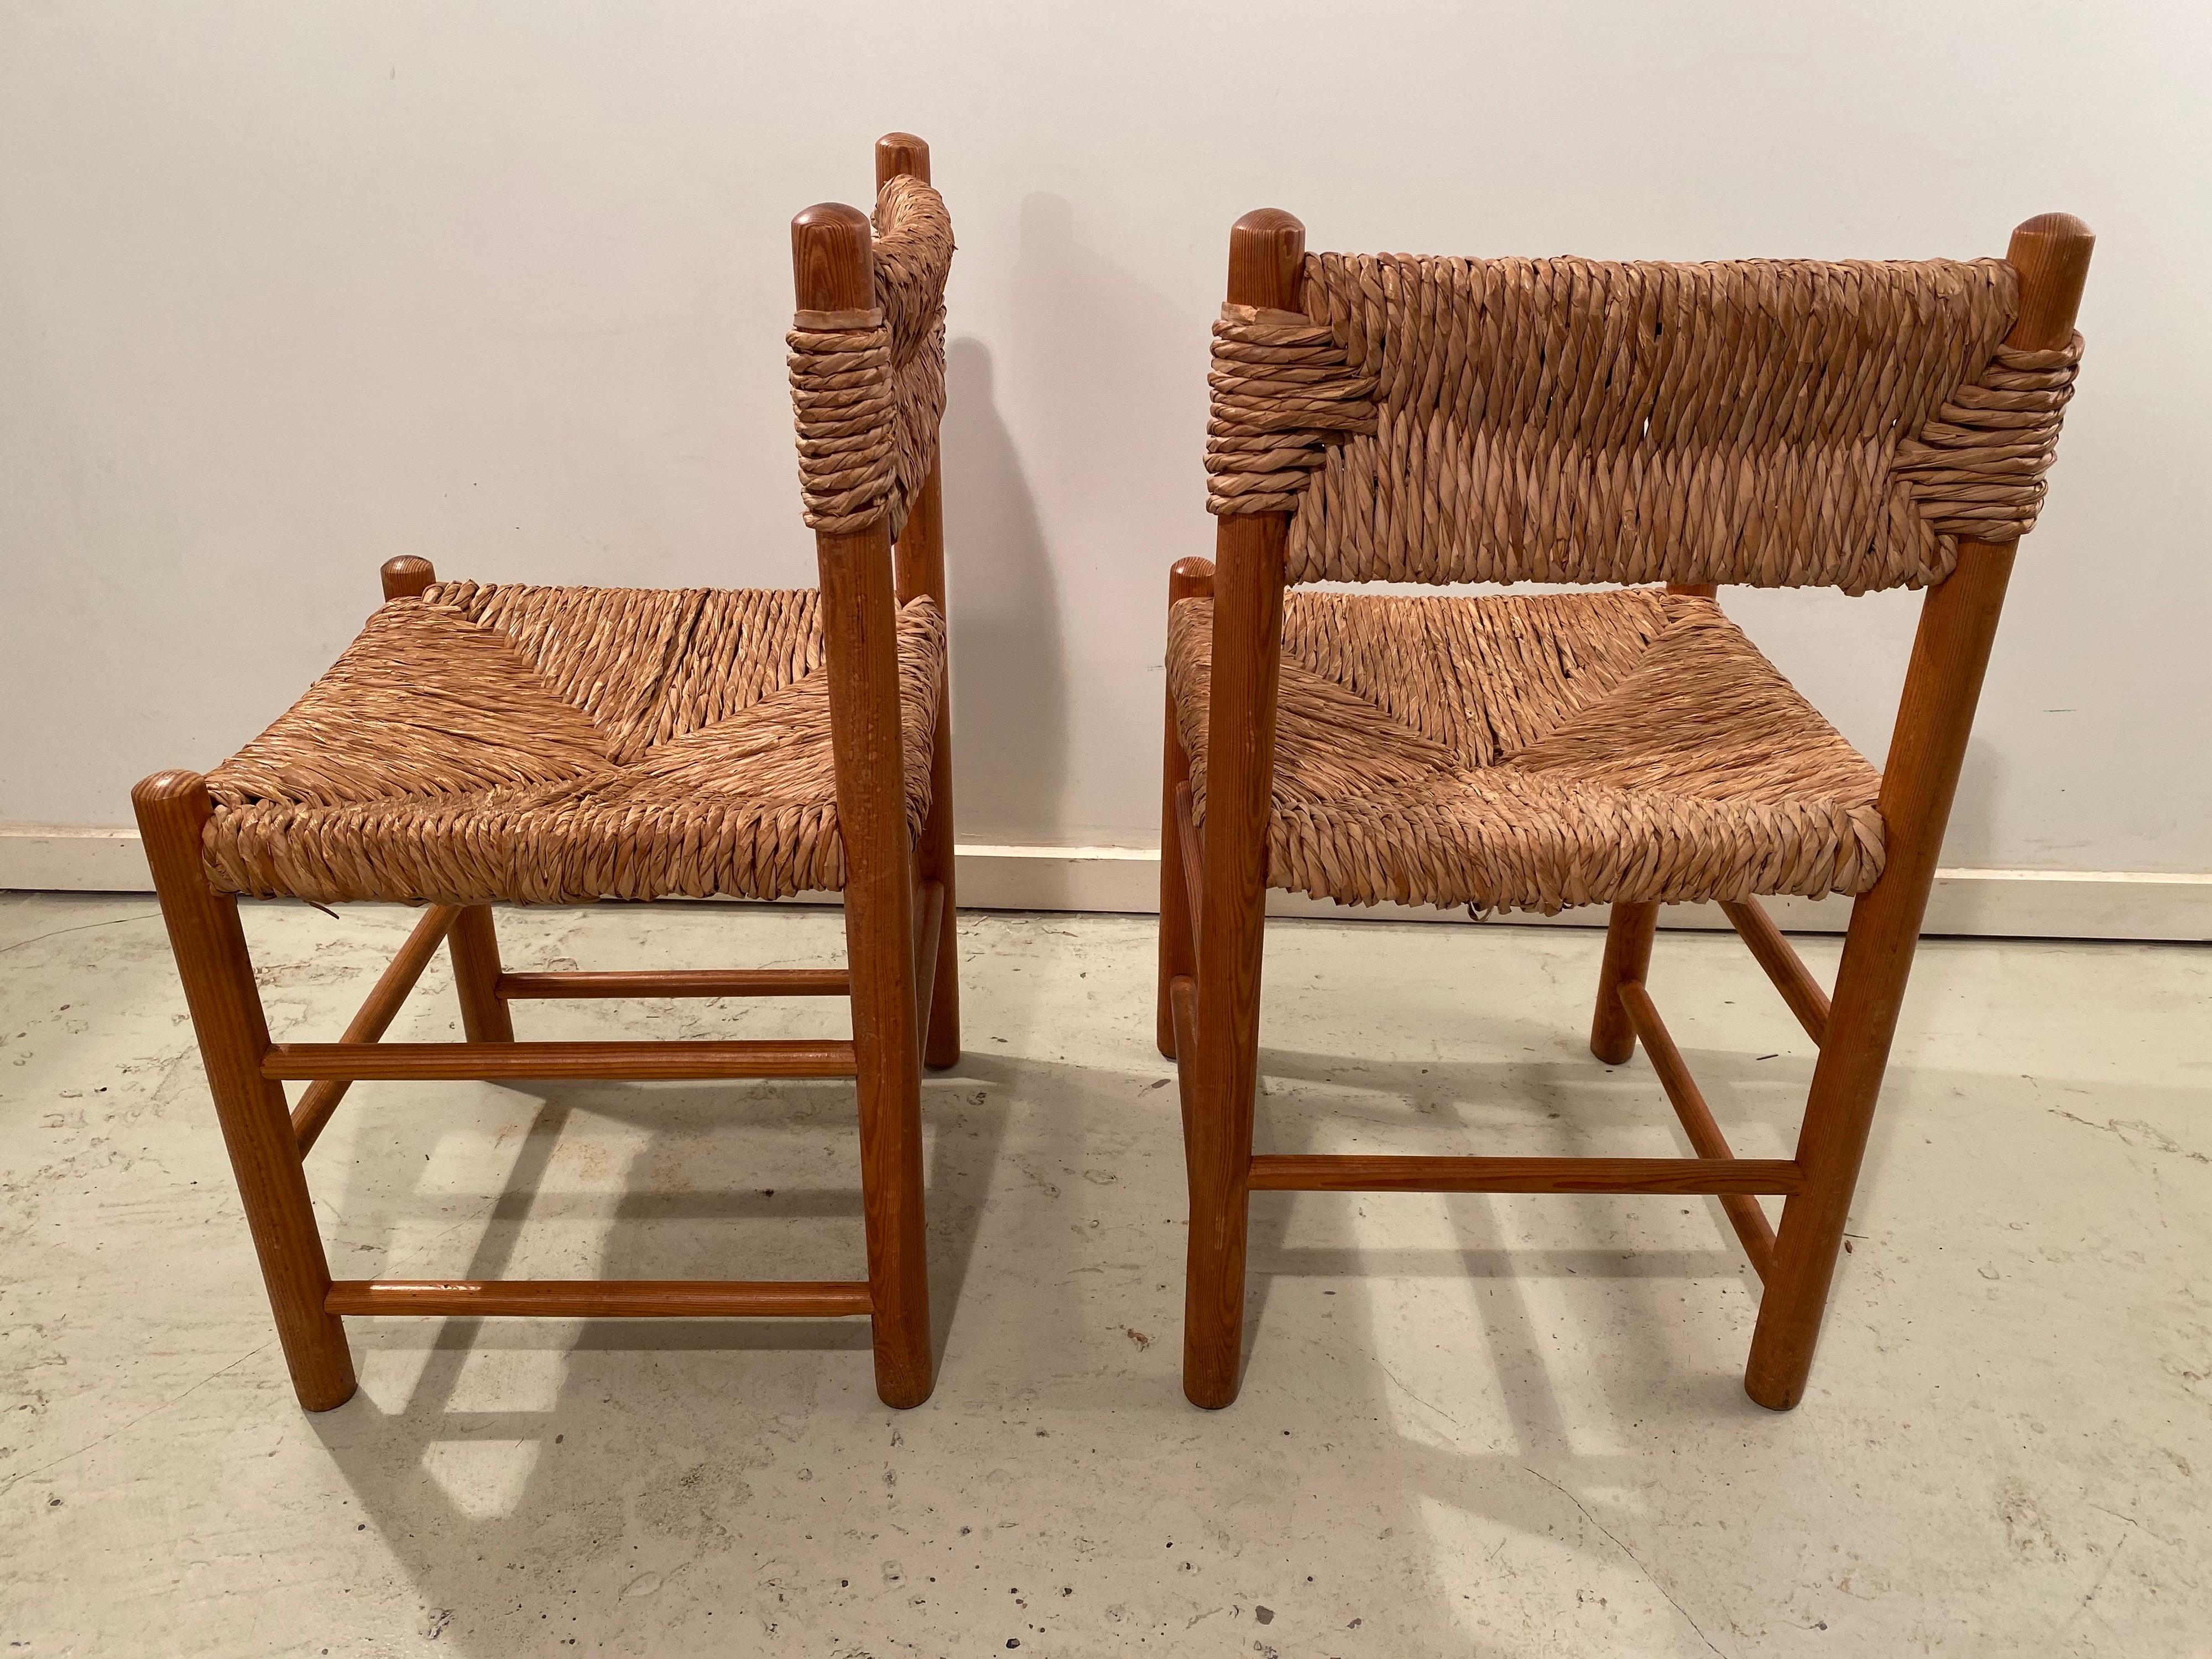 Another Pair of Dordogne Chairs by Charlotte Perriand for Sentou In Good Condition For Sale In Amsterdam, NL